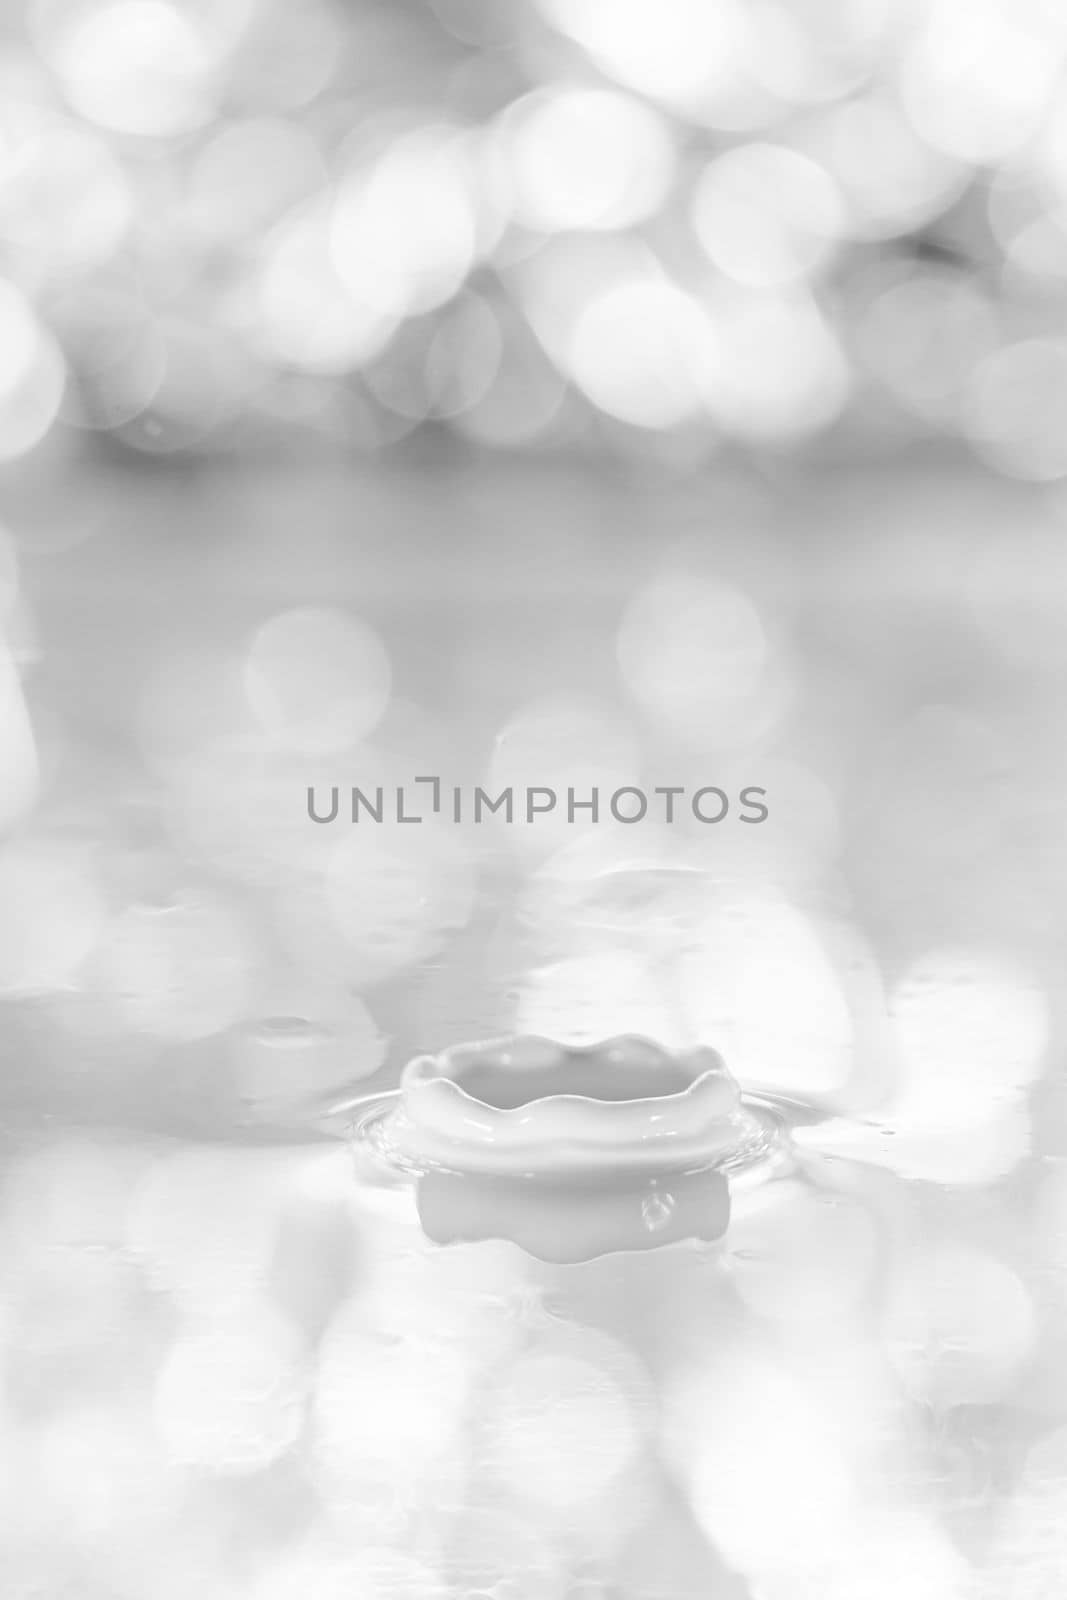 The drop falls into a dense liquid with a white background. Abstract colorful background